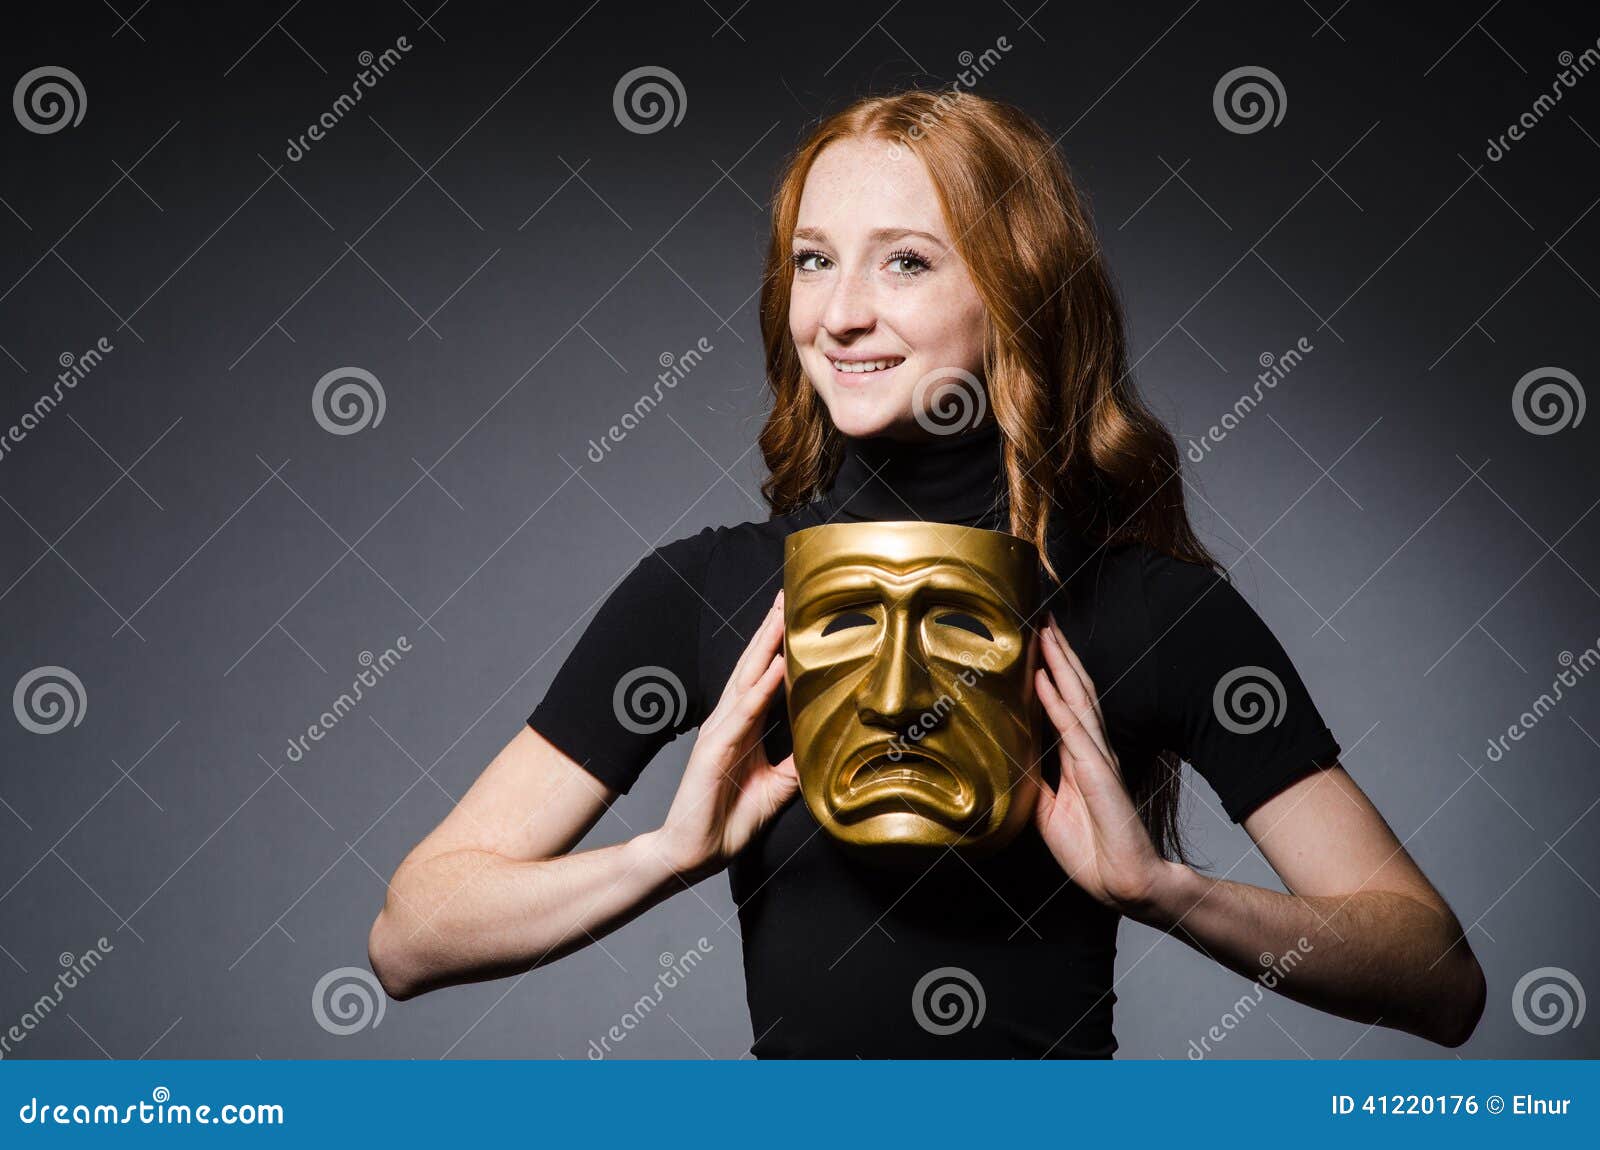 redhead woman iwith mask in hypocrisy consept against